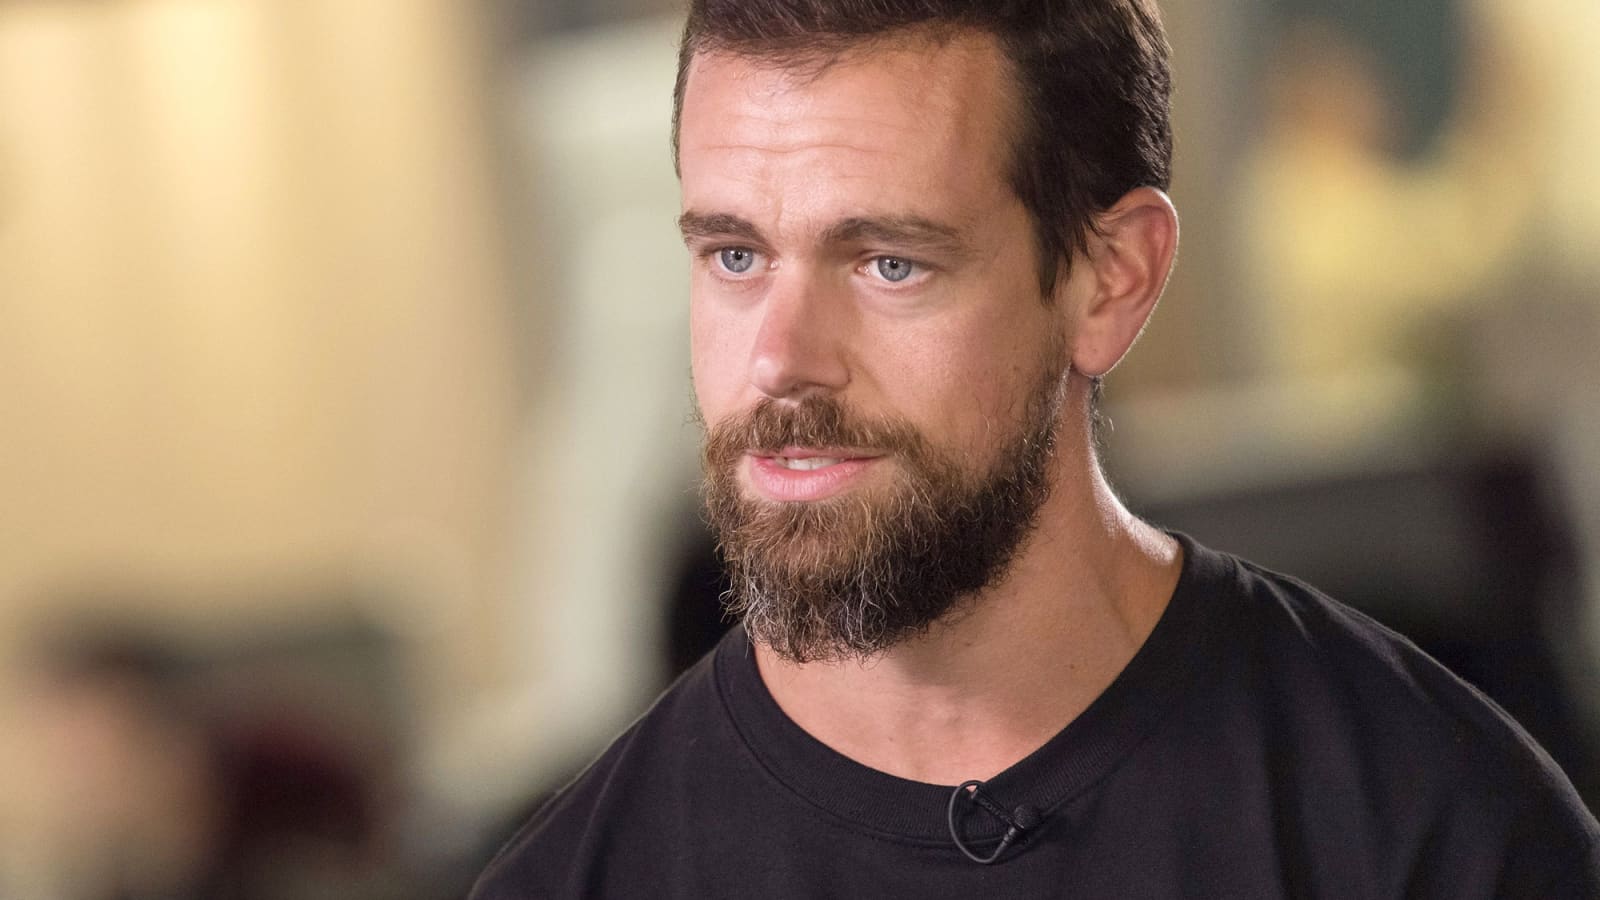 Jack Dorsey says the 'only' cryptocurrency he owns is bitcoin